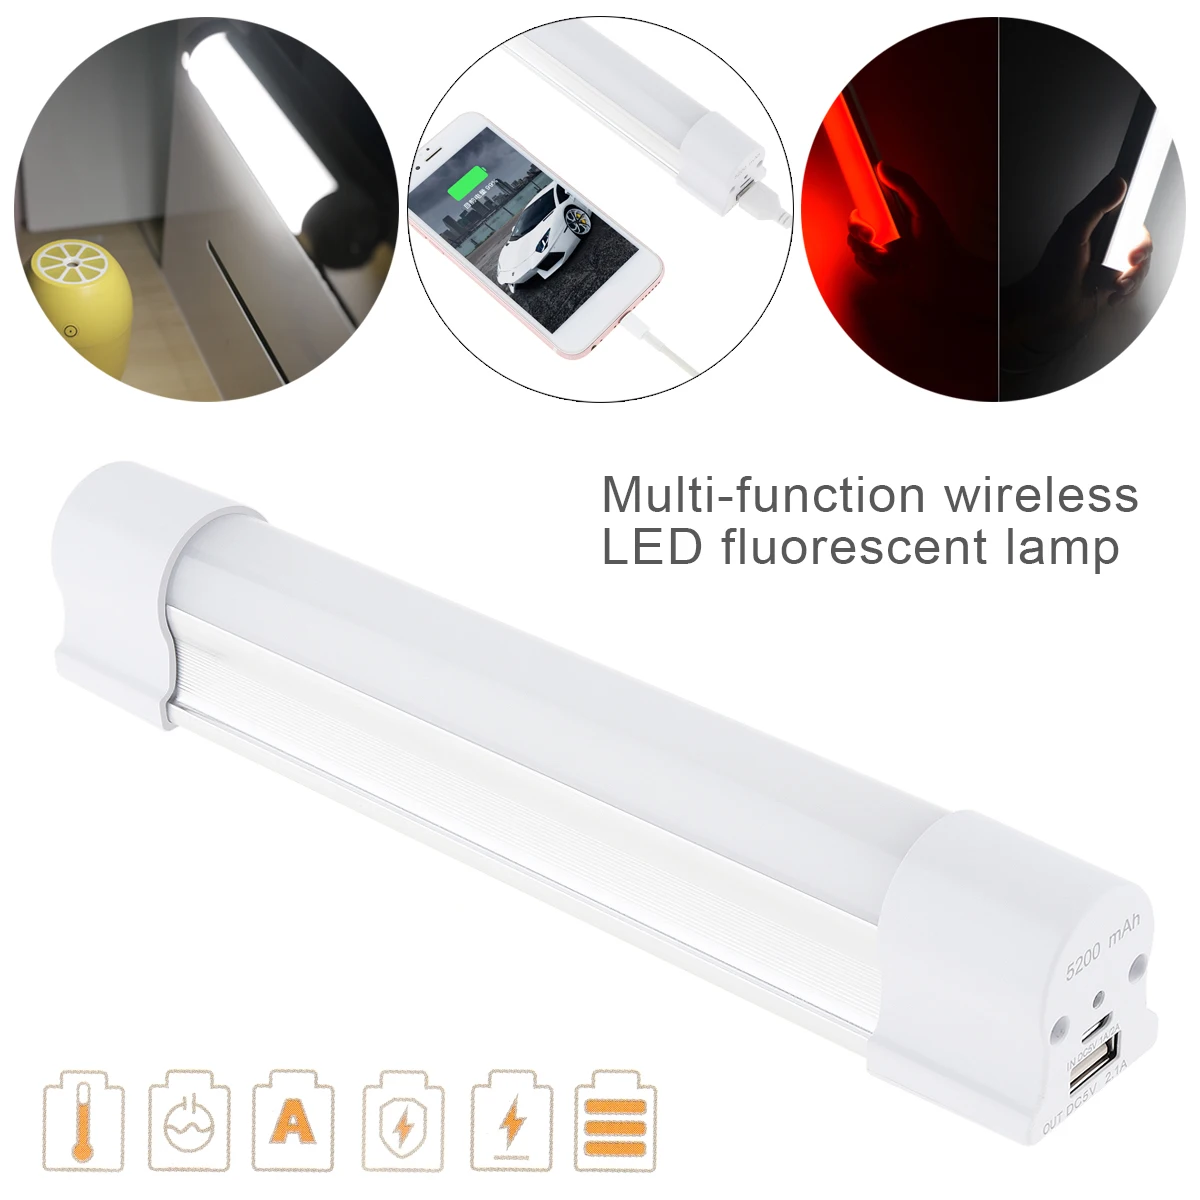 Multi-function Wireless LED Fluorescent Lamp Rechargeable with 5 Modes for Outdoor Camping